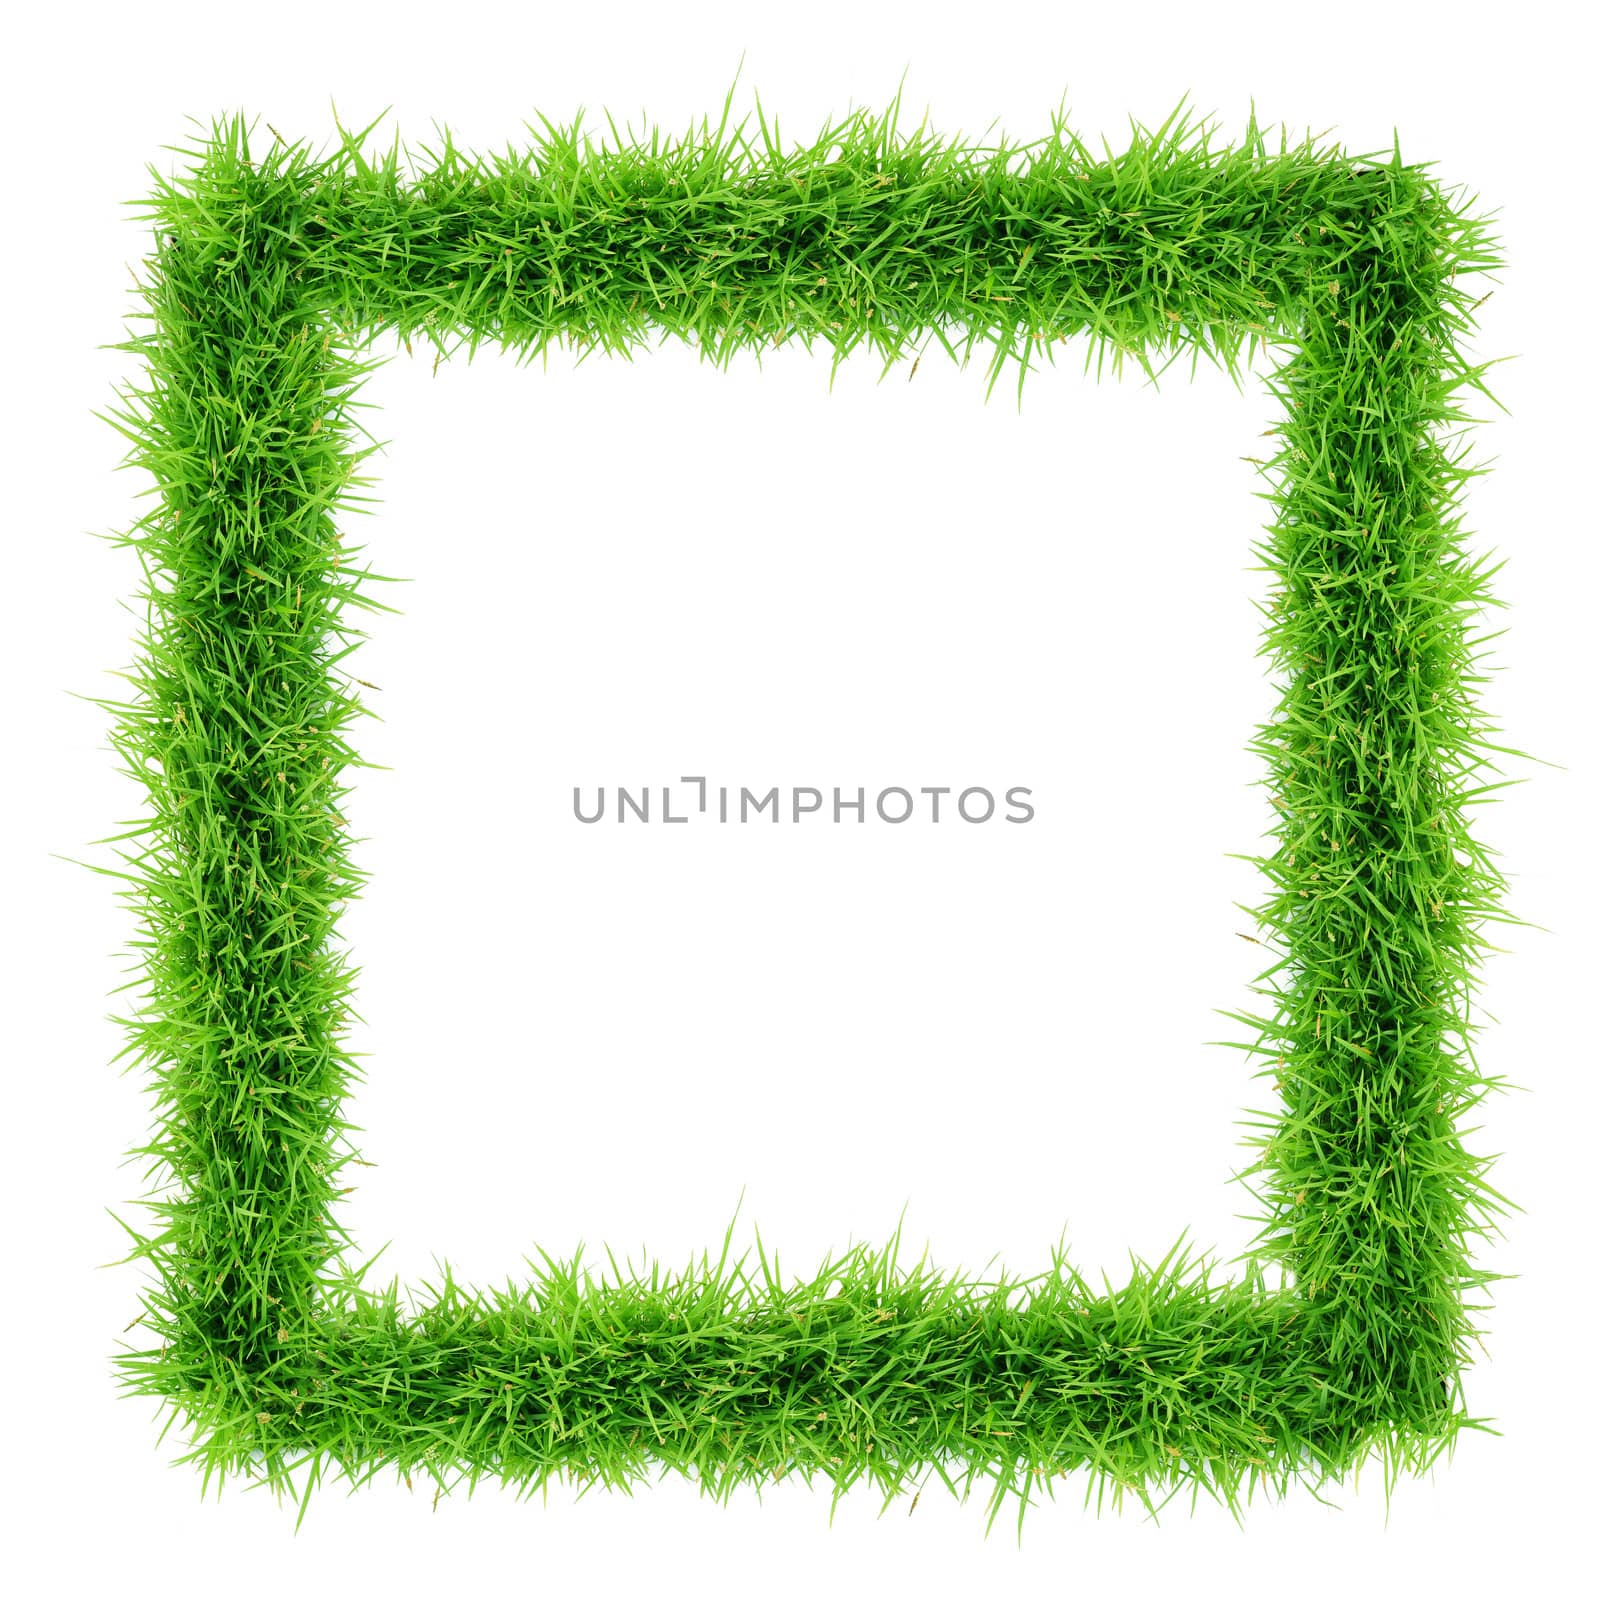 grass frame top view on white background